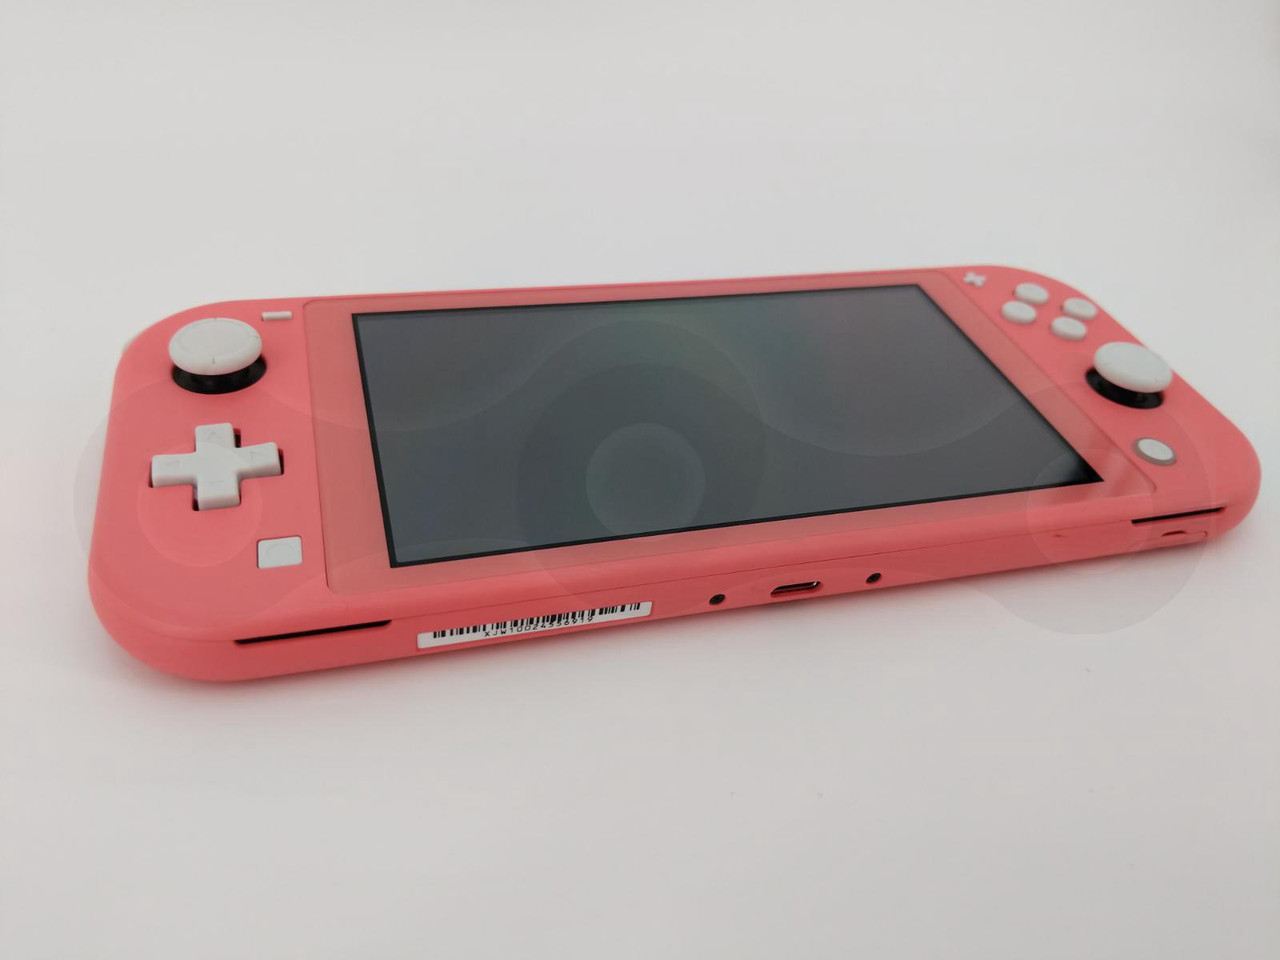 NINTENDO SWITCH LITE CORAL PINK HDH-001 HAND-HELD VIDEO GAMING CONSOLE ONLY  USED